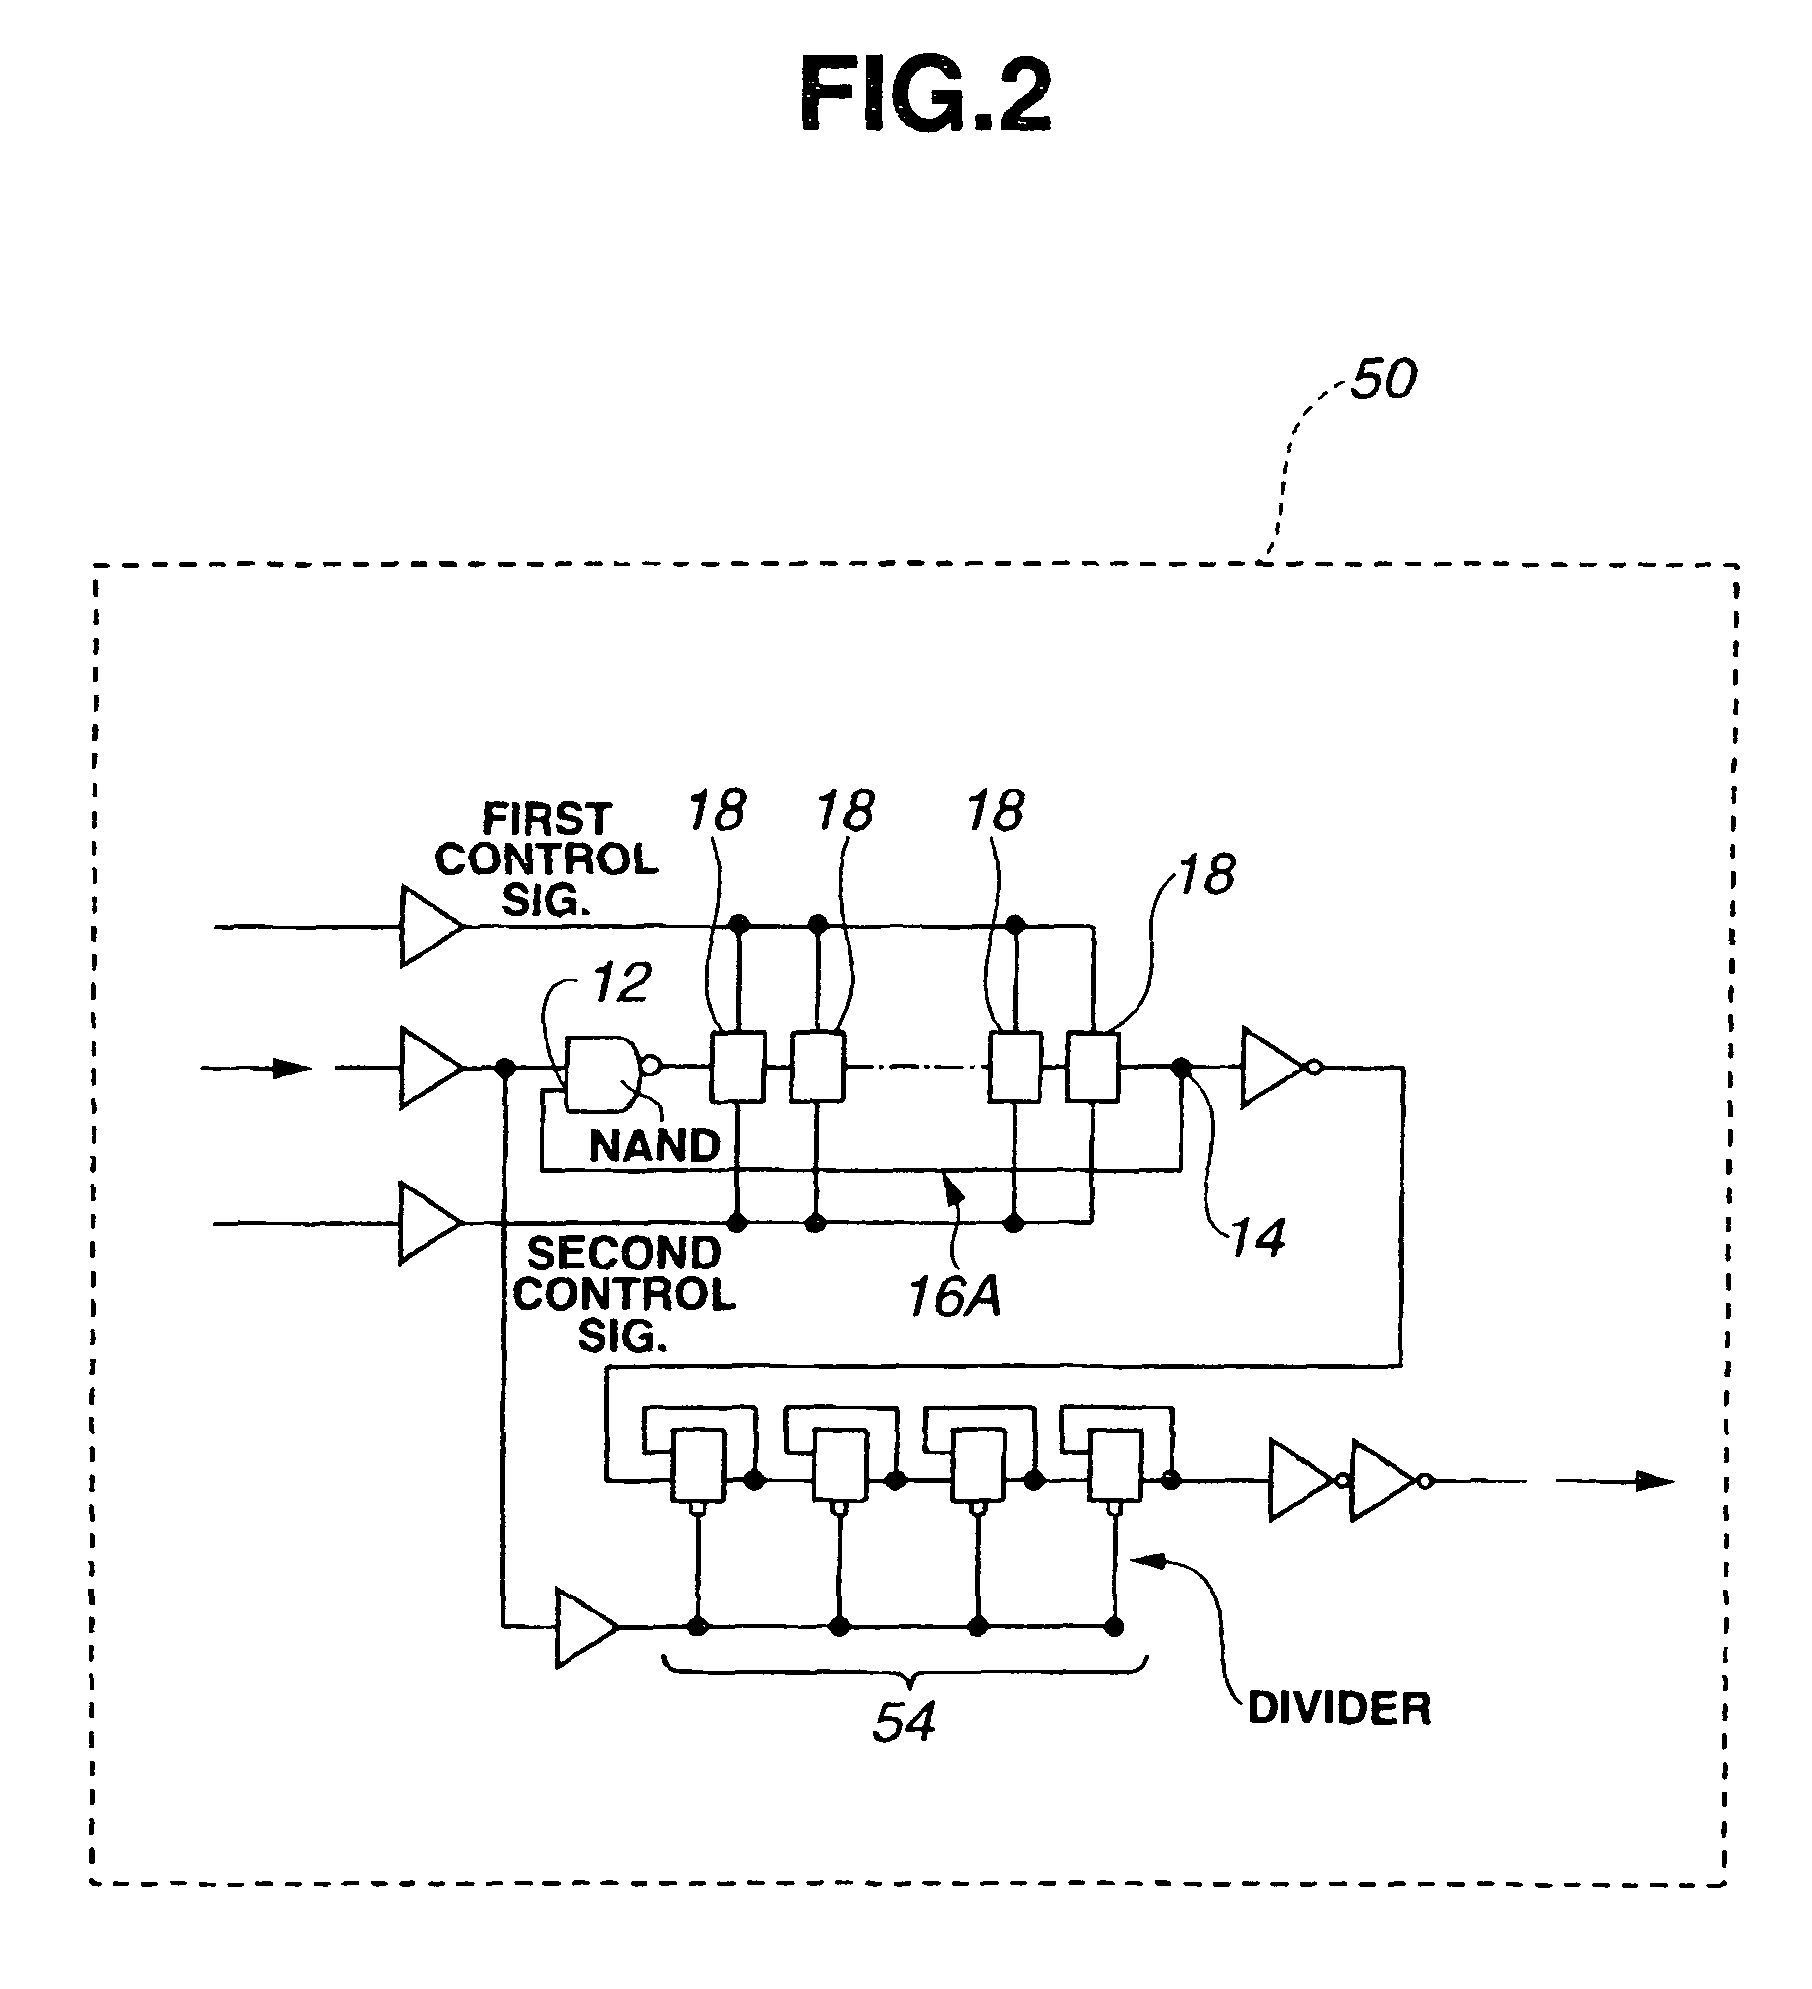 Test method and apparatus for verifying fabrication of transistors in an integrated circuit